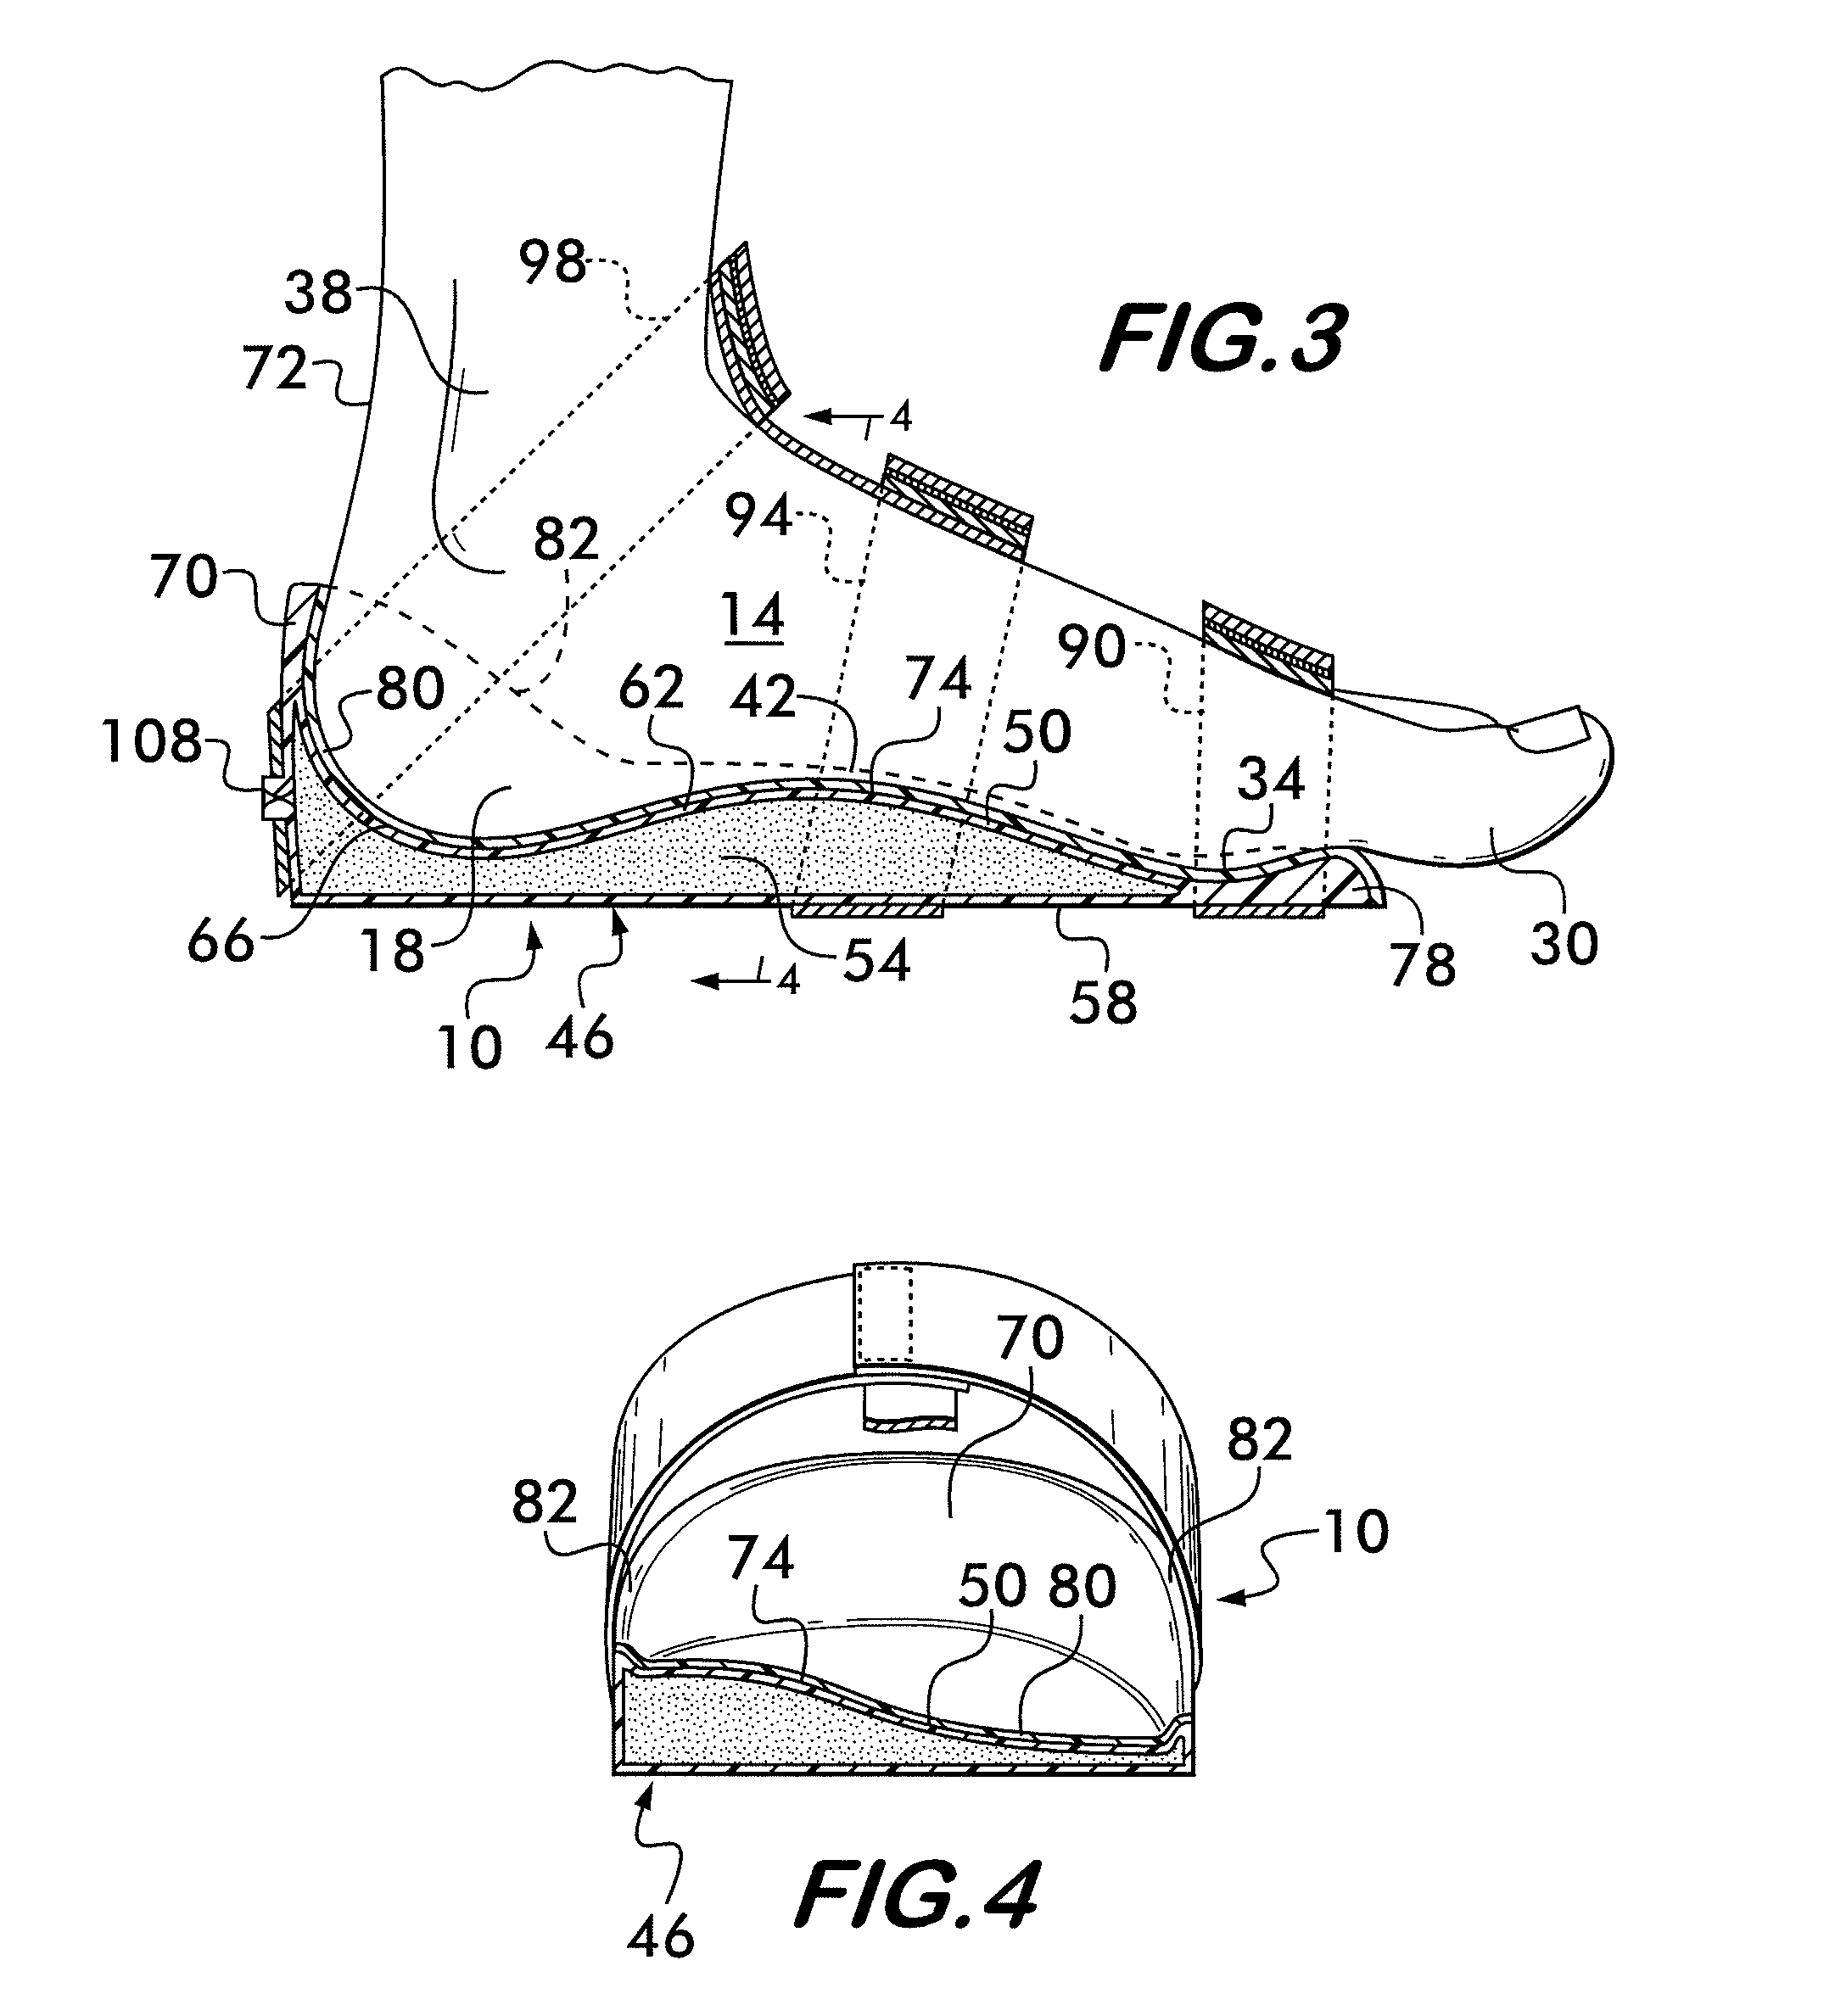 Device for applying cold therapy to feet